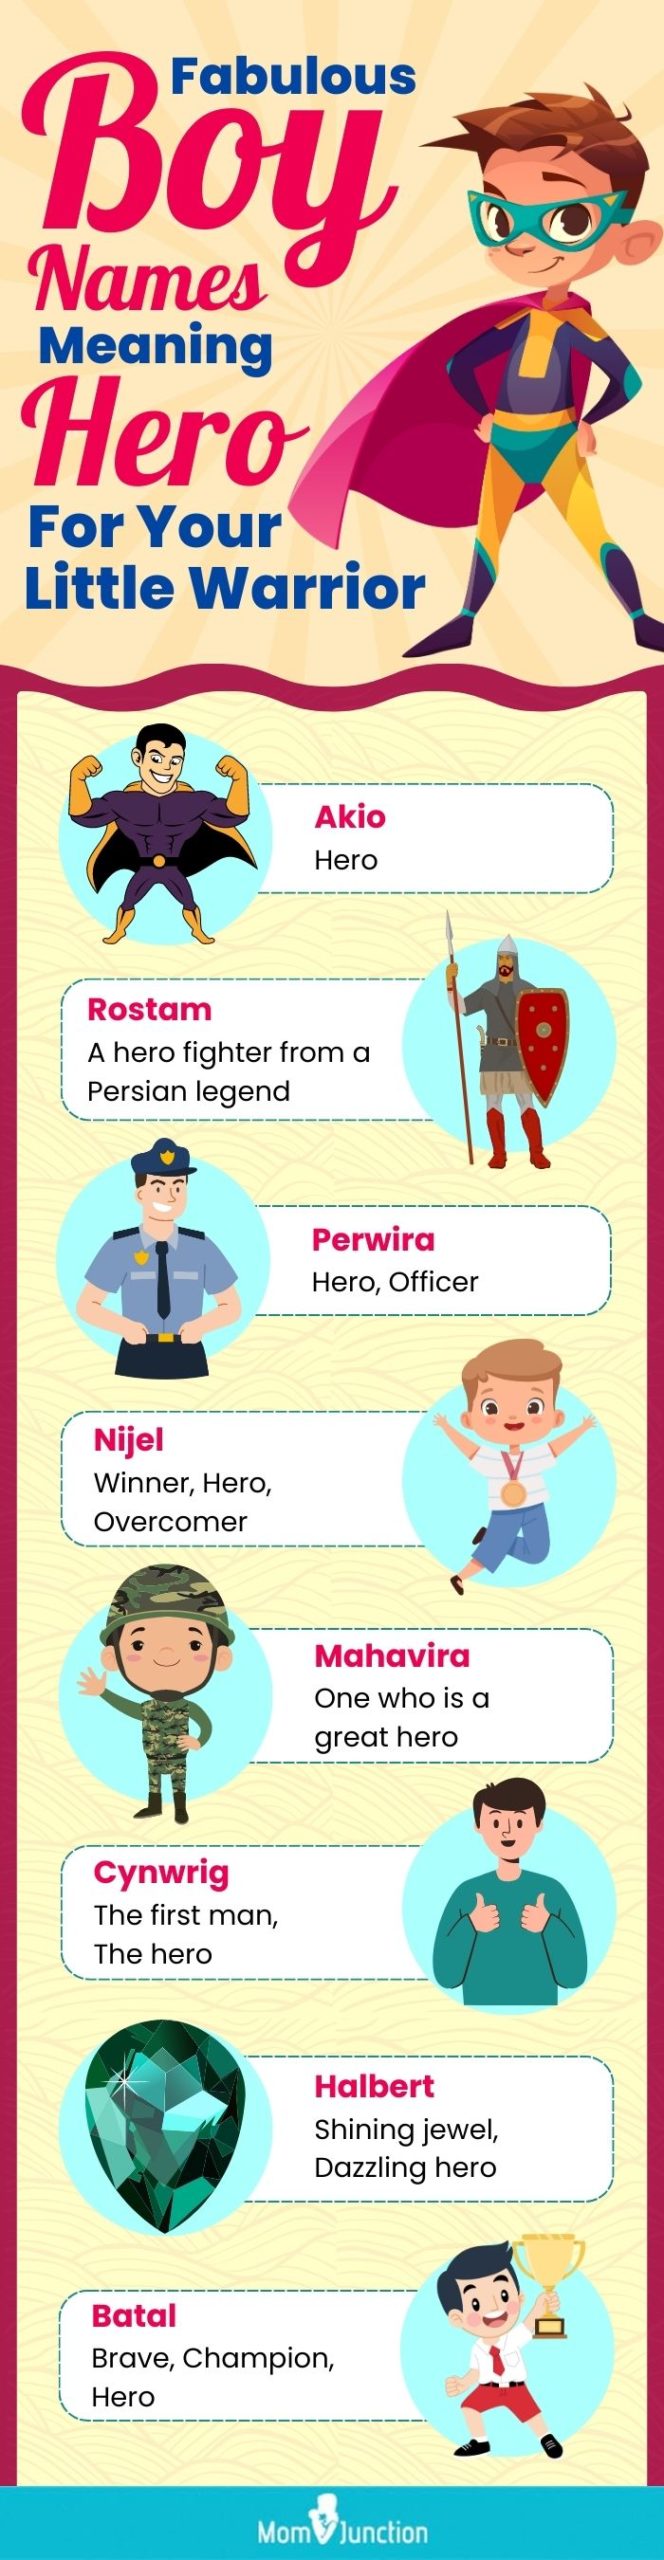 fabulous boy names meaning hero for your little warrior (infographic)